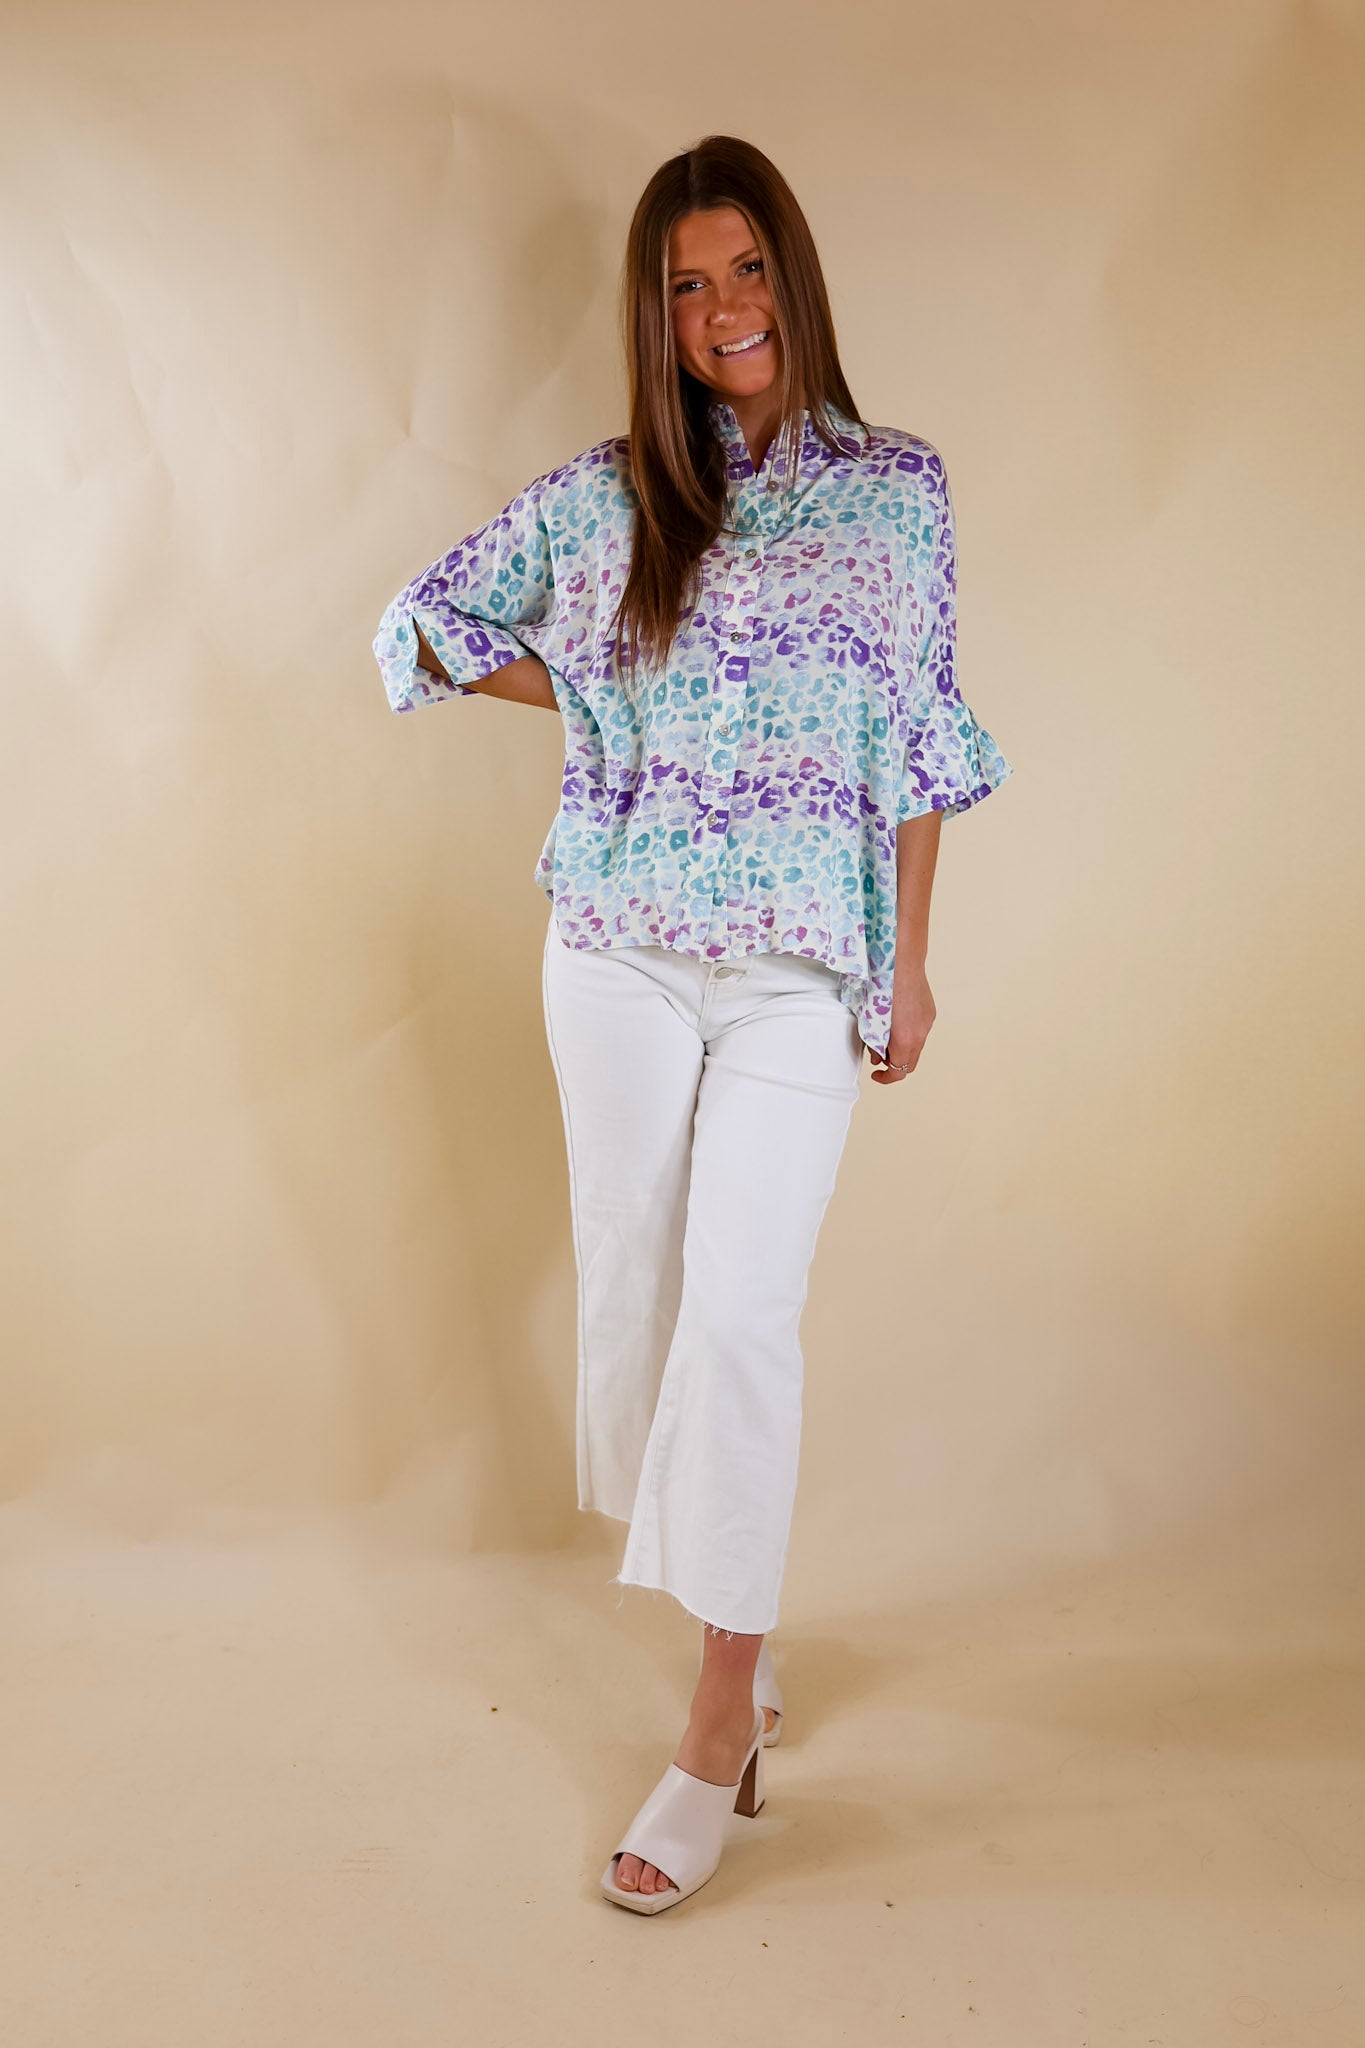 Hotter Than Ever Leopard Print Button Up Top with Short Sleeves in Purple Mix - Giddy Up Glamour Boutique